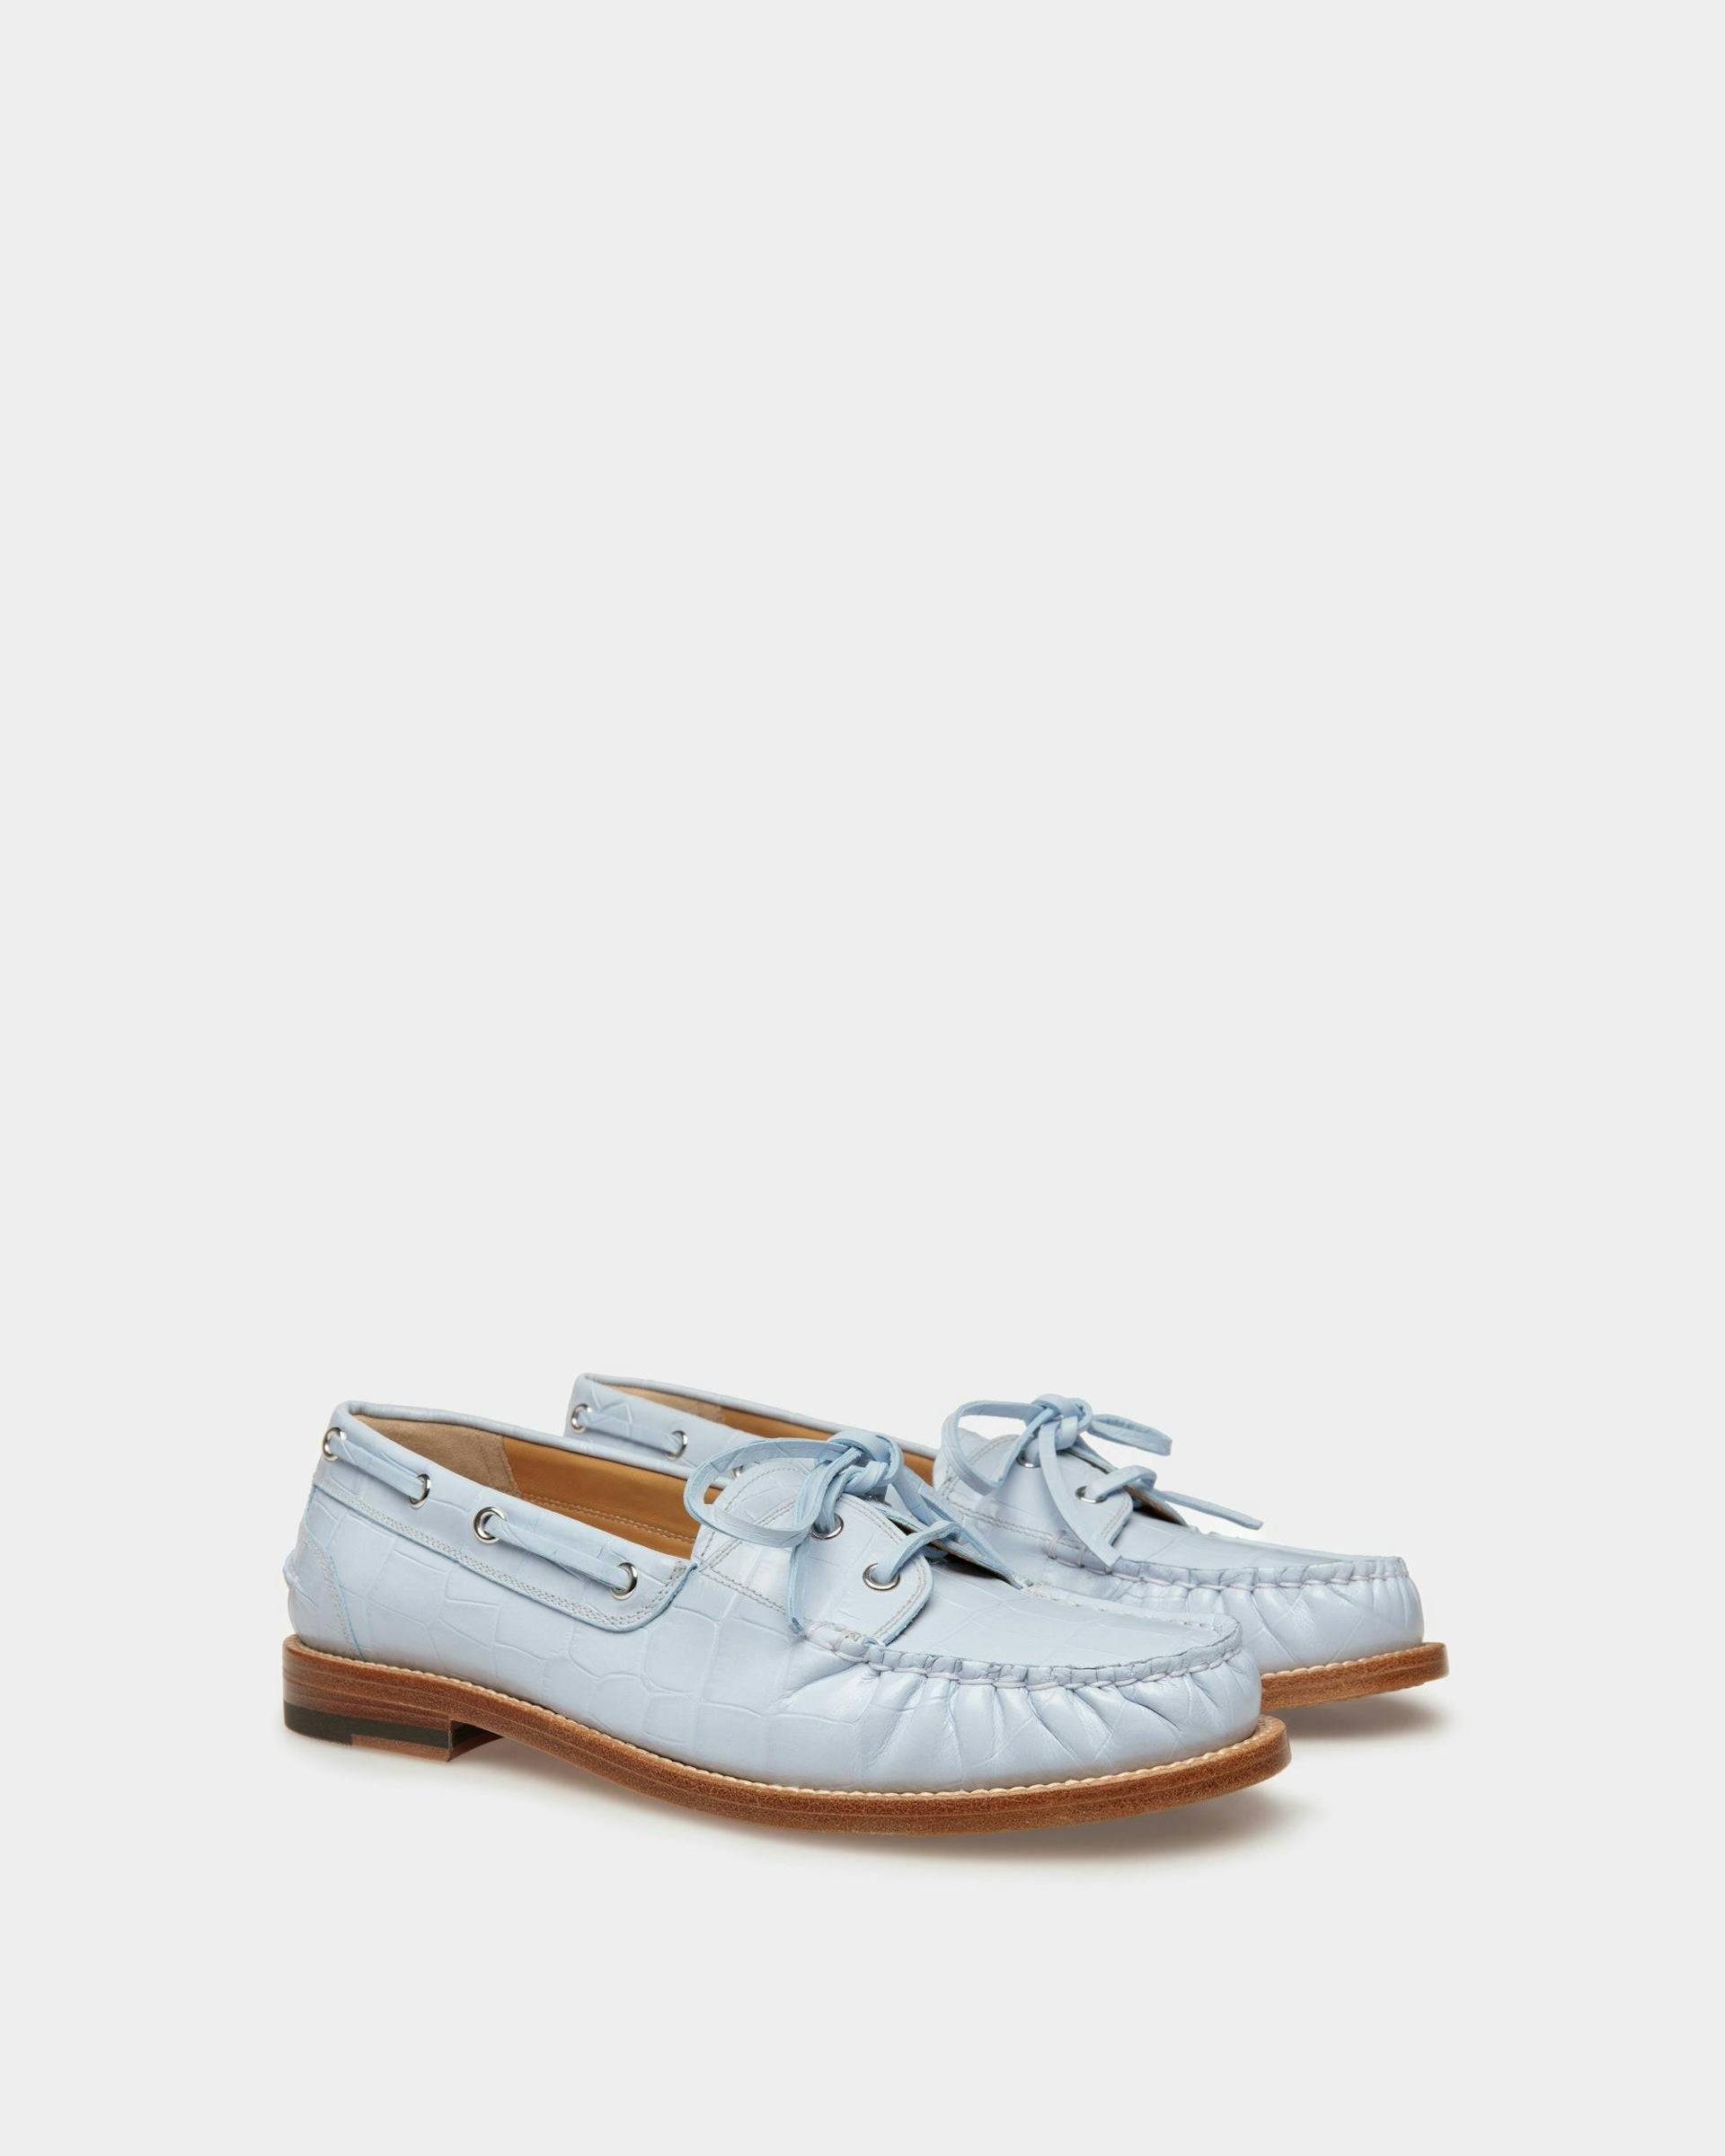 Rome Moccasins In Light Blue Leather - Women's - Bally - 02